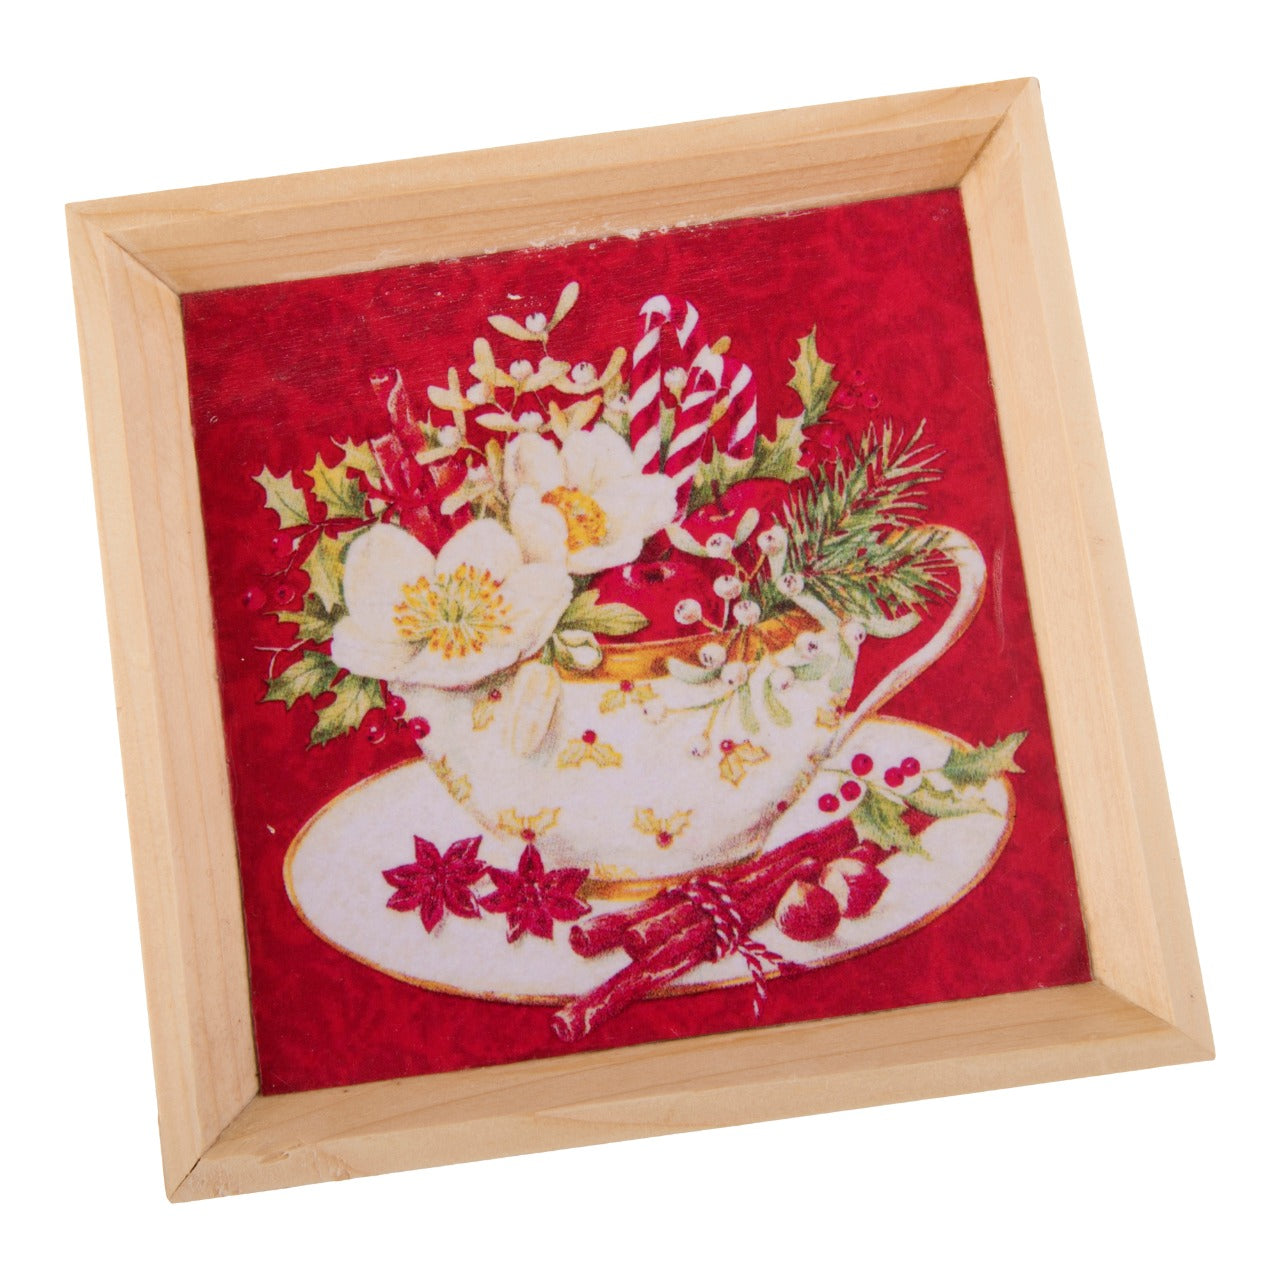 A Tiny Mistake Tea Cup Full of Flowers Small Square Wooden Serving Tray, 18 x 18 x 2 cm